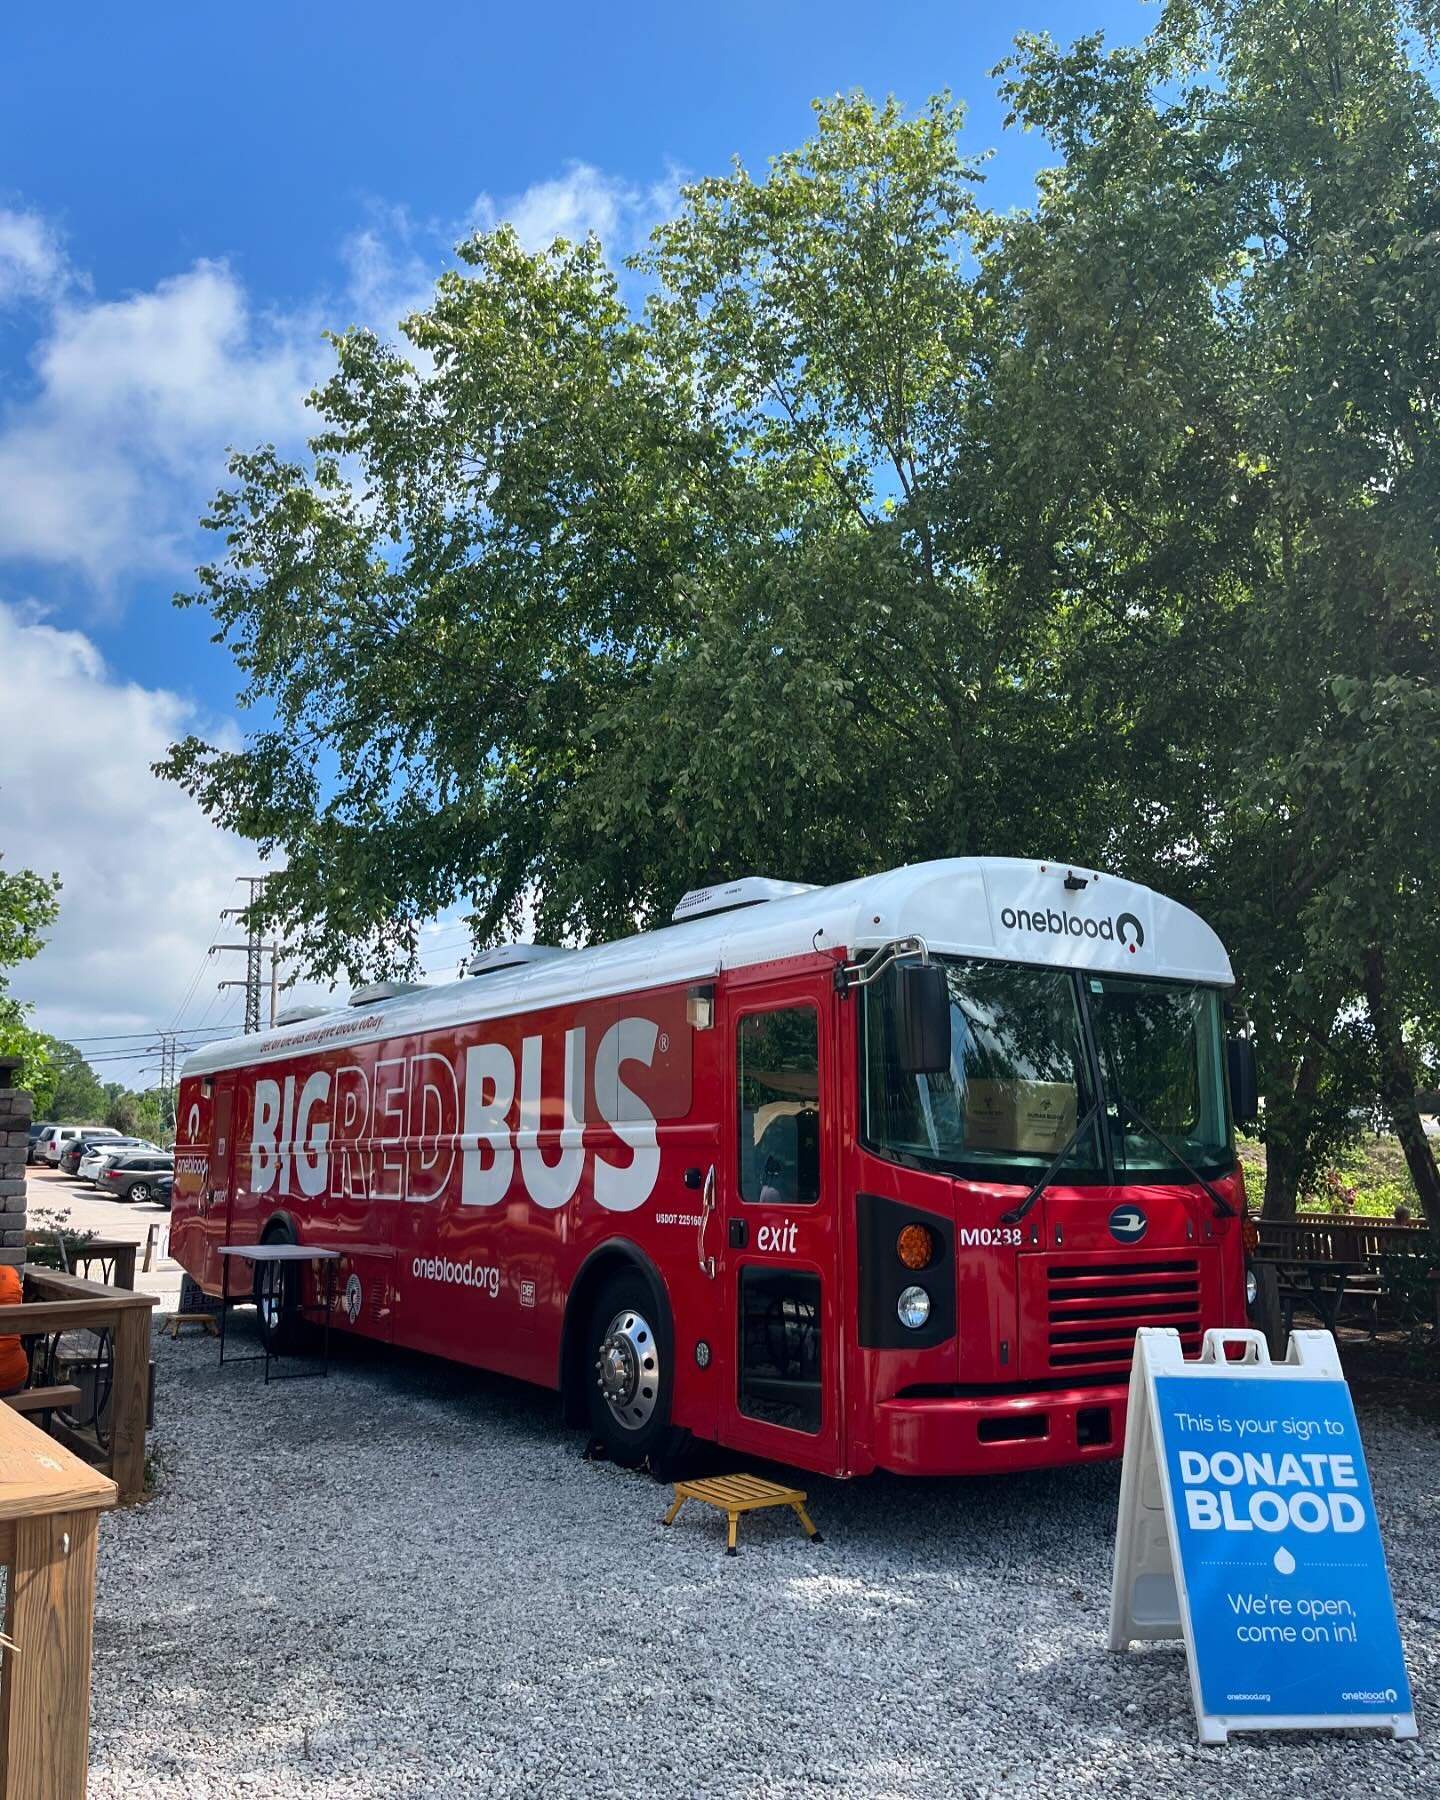 They&rsquo;re out for blood&hellip; I mean, in a good way, to save lives! @myoneblood is here, donate blood and in exchange you&rsquo;ll get a gift from them, and a little gift from us! Hint: our gift is stecca.